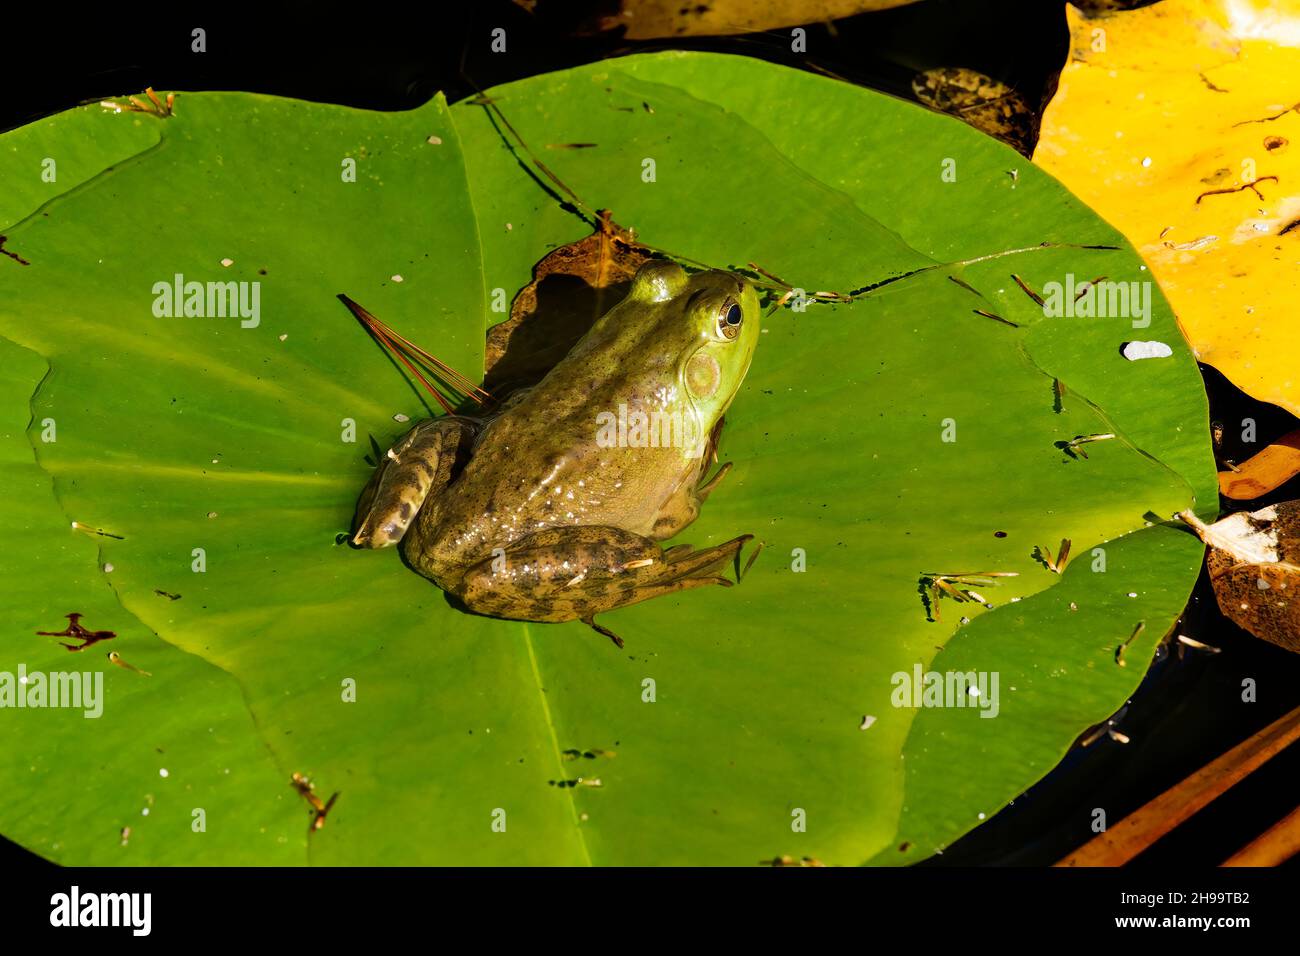 A green Frog sitting on a lily Pad Stock Photo